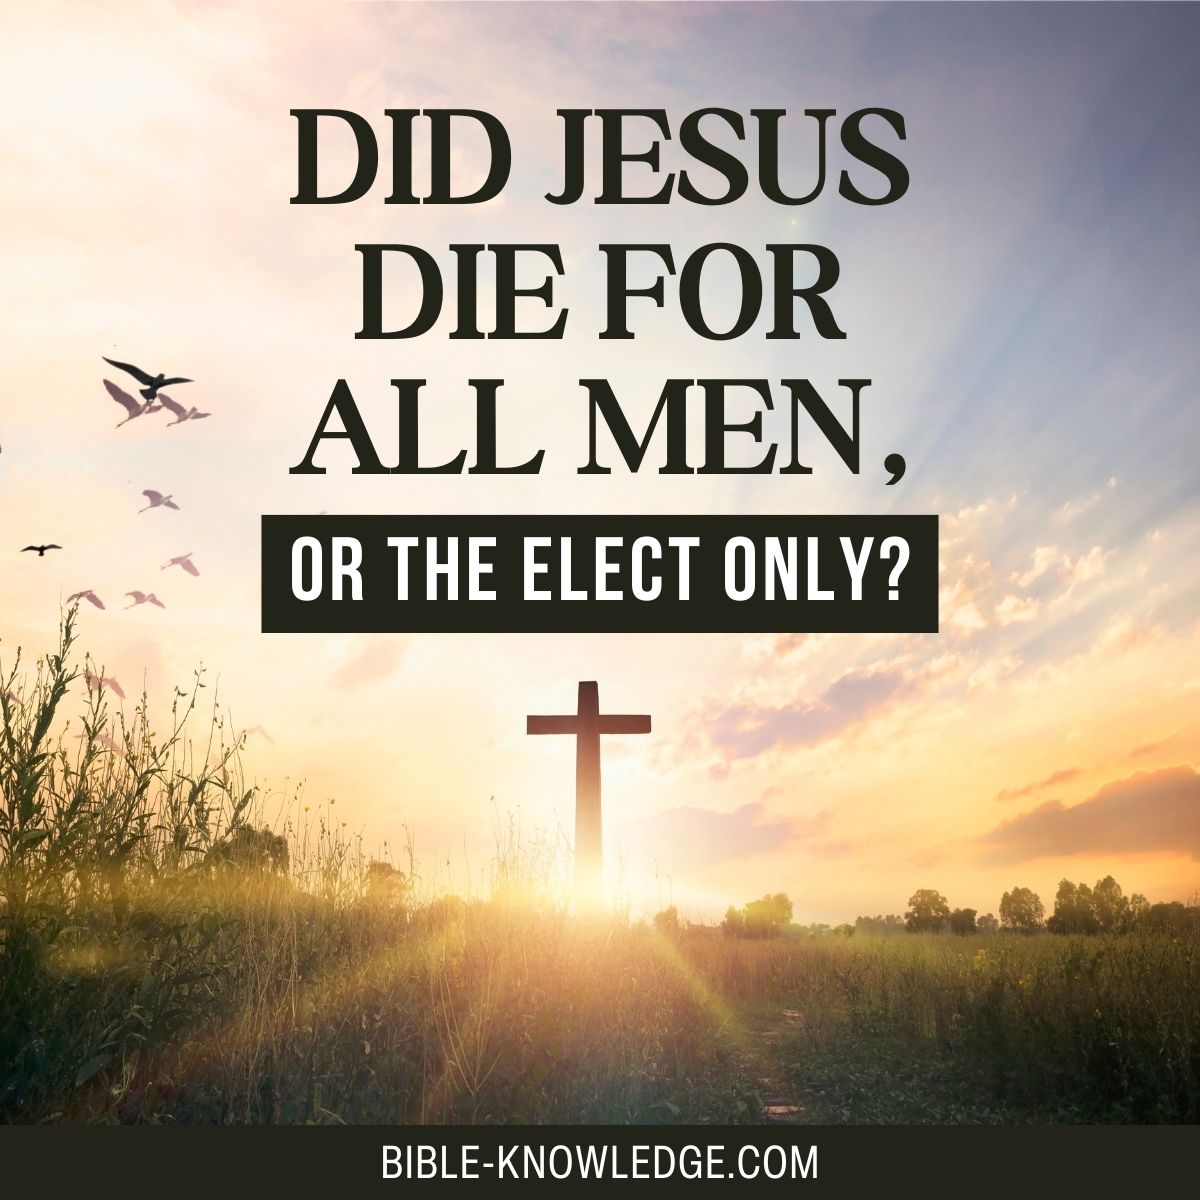 Did Jesus Die for All Men, or the Elect Only?